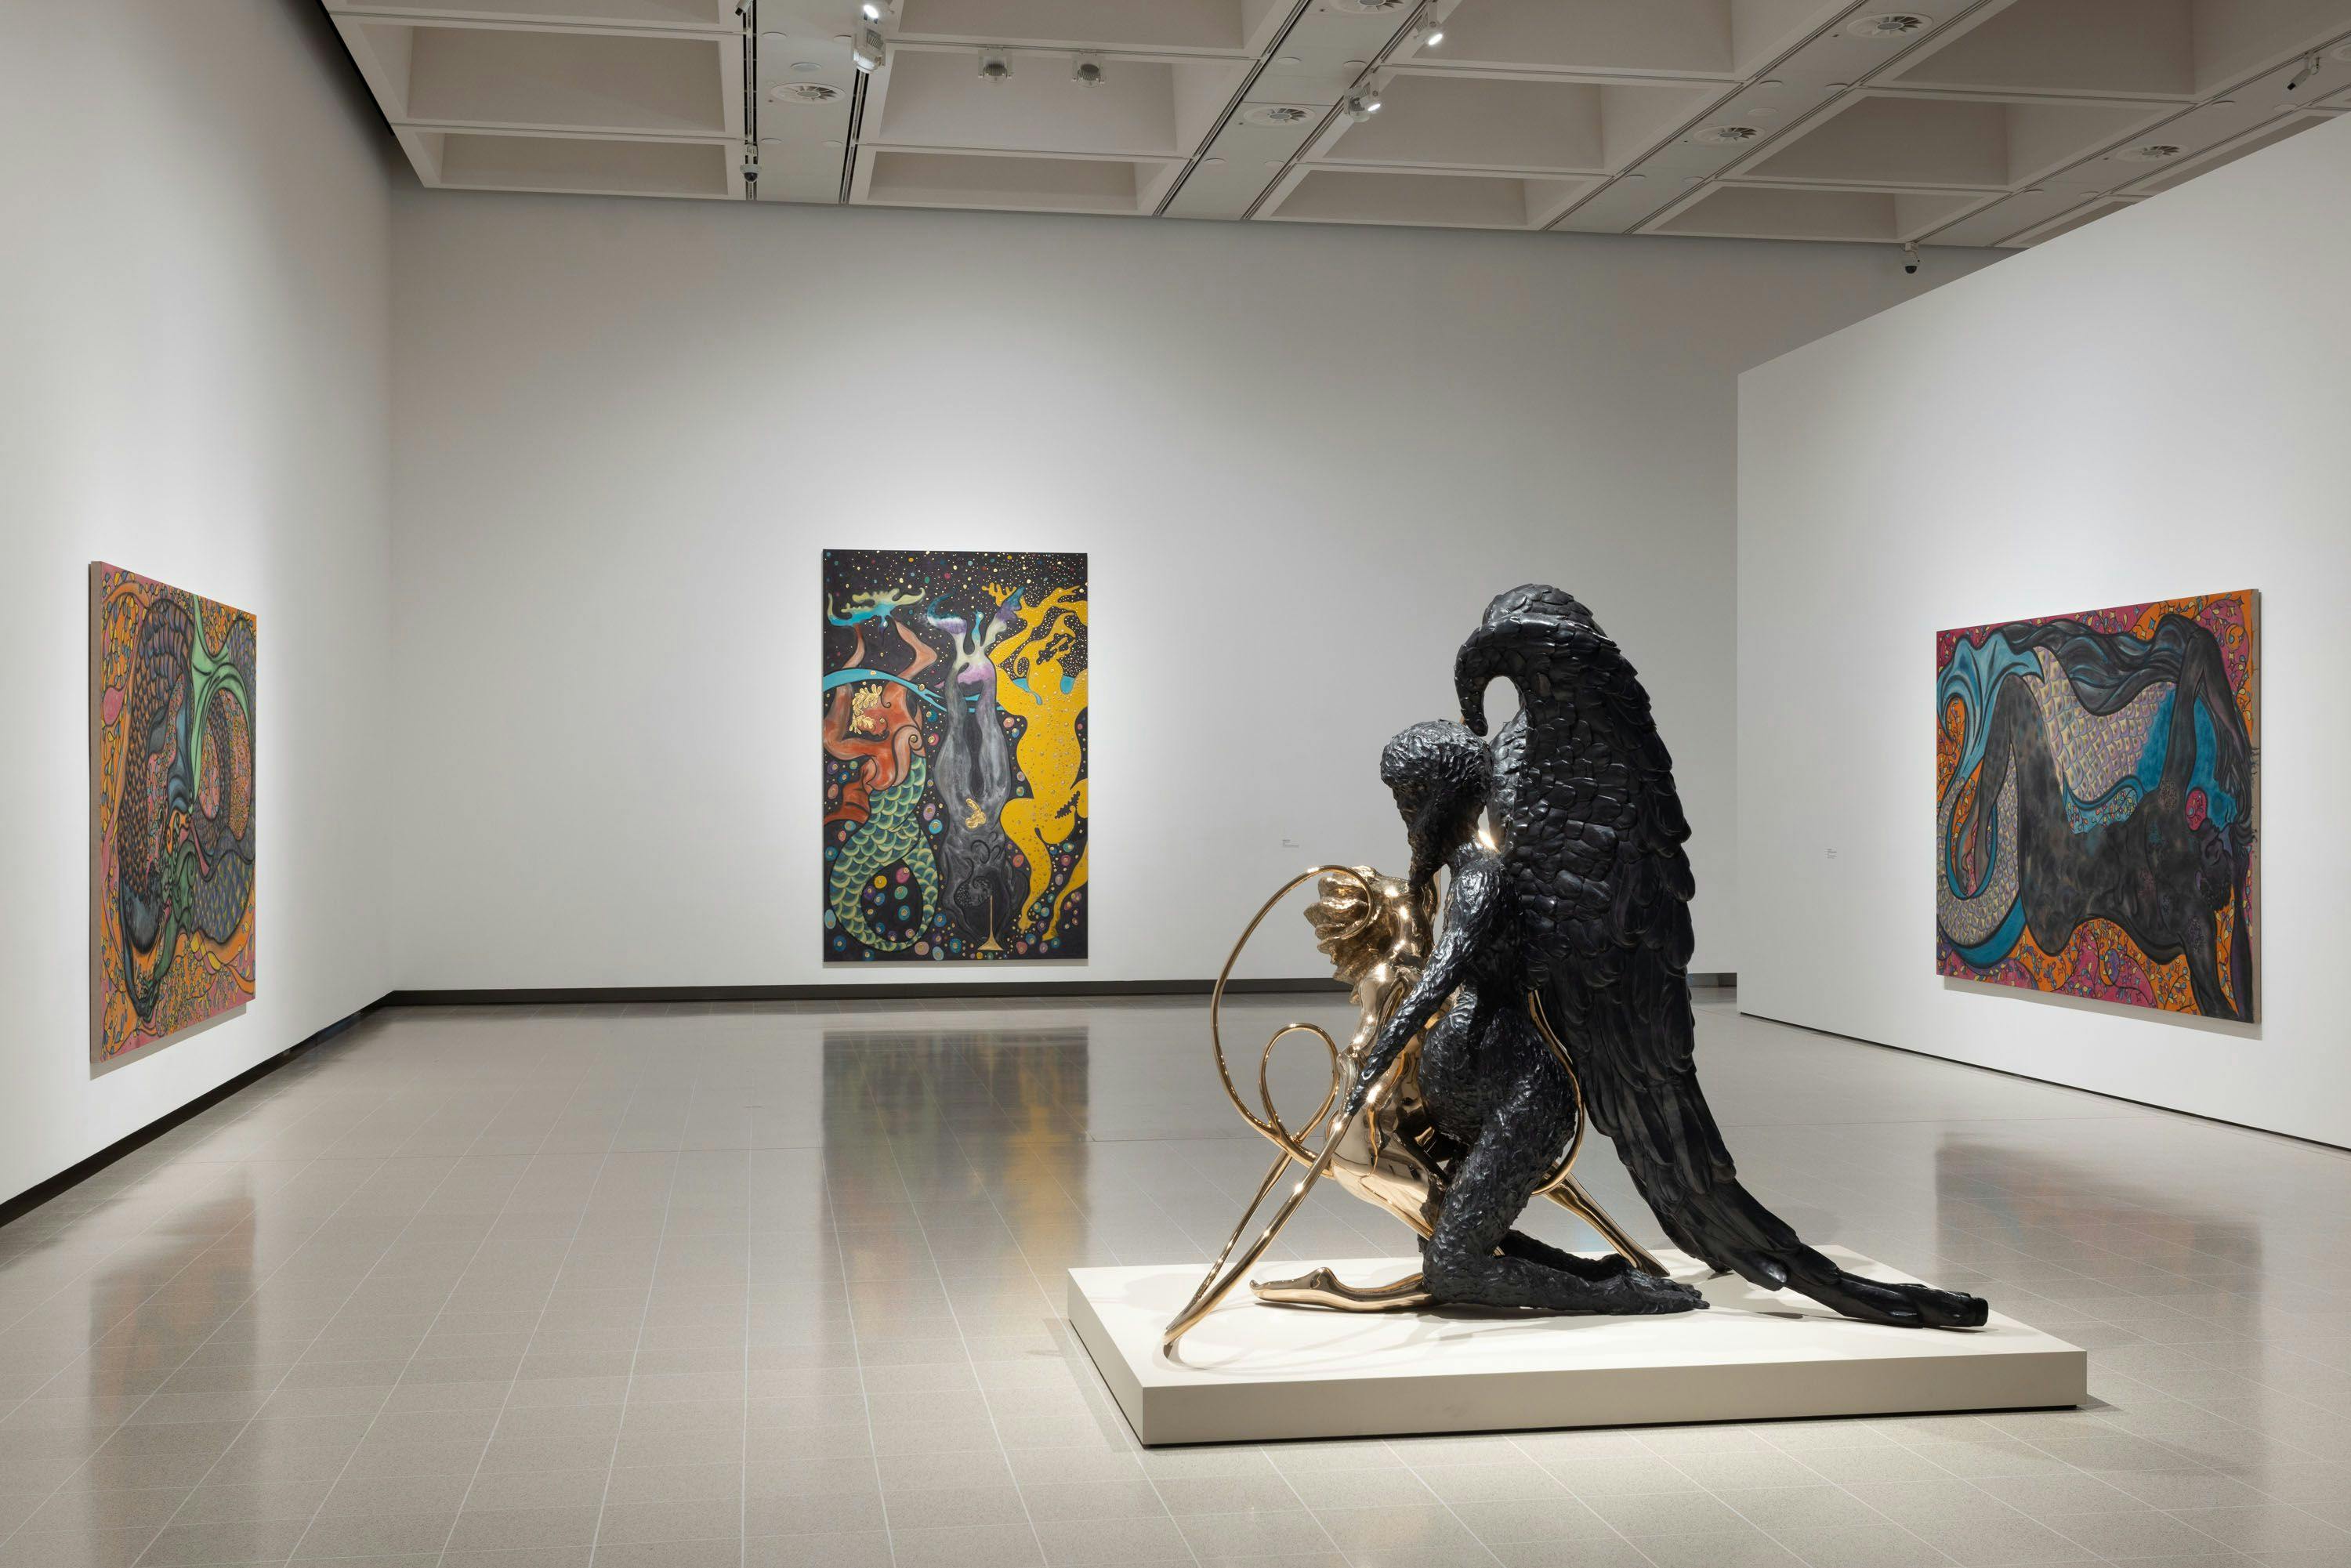 Installation view of the exhibition, Chris Ofili: In the Black Fantastic, at The Hayward Gallery in London, England, dated 2022.